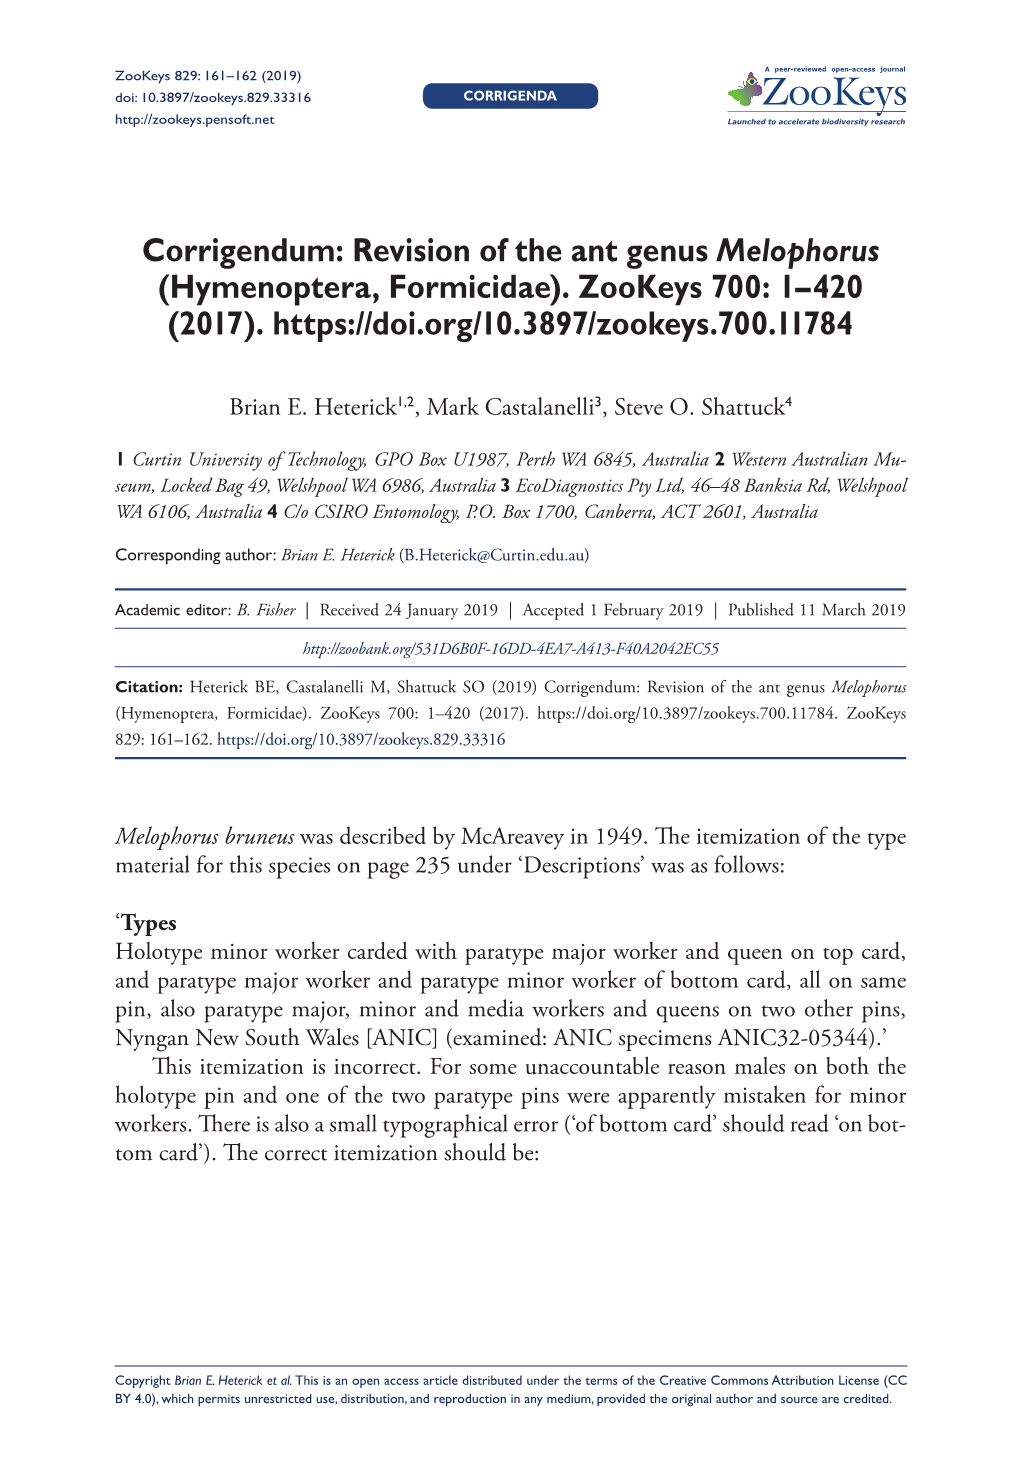 Revision of the Ant Genus Melophorus (Hymenoptera, Formicidae)